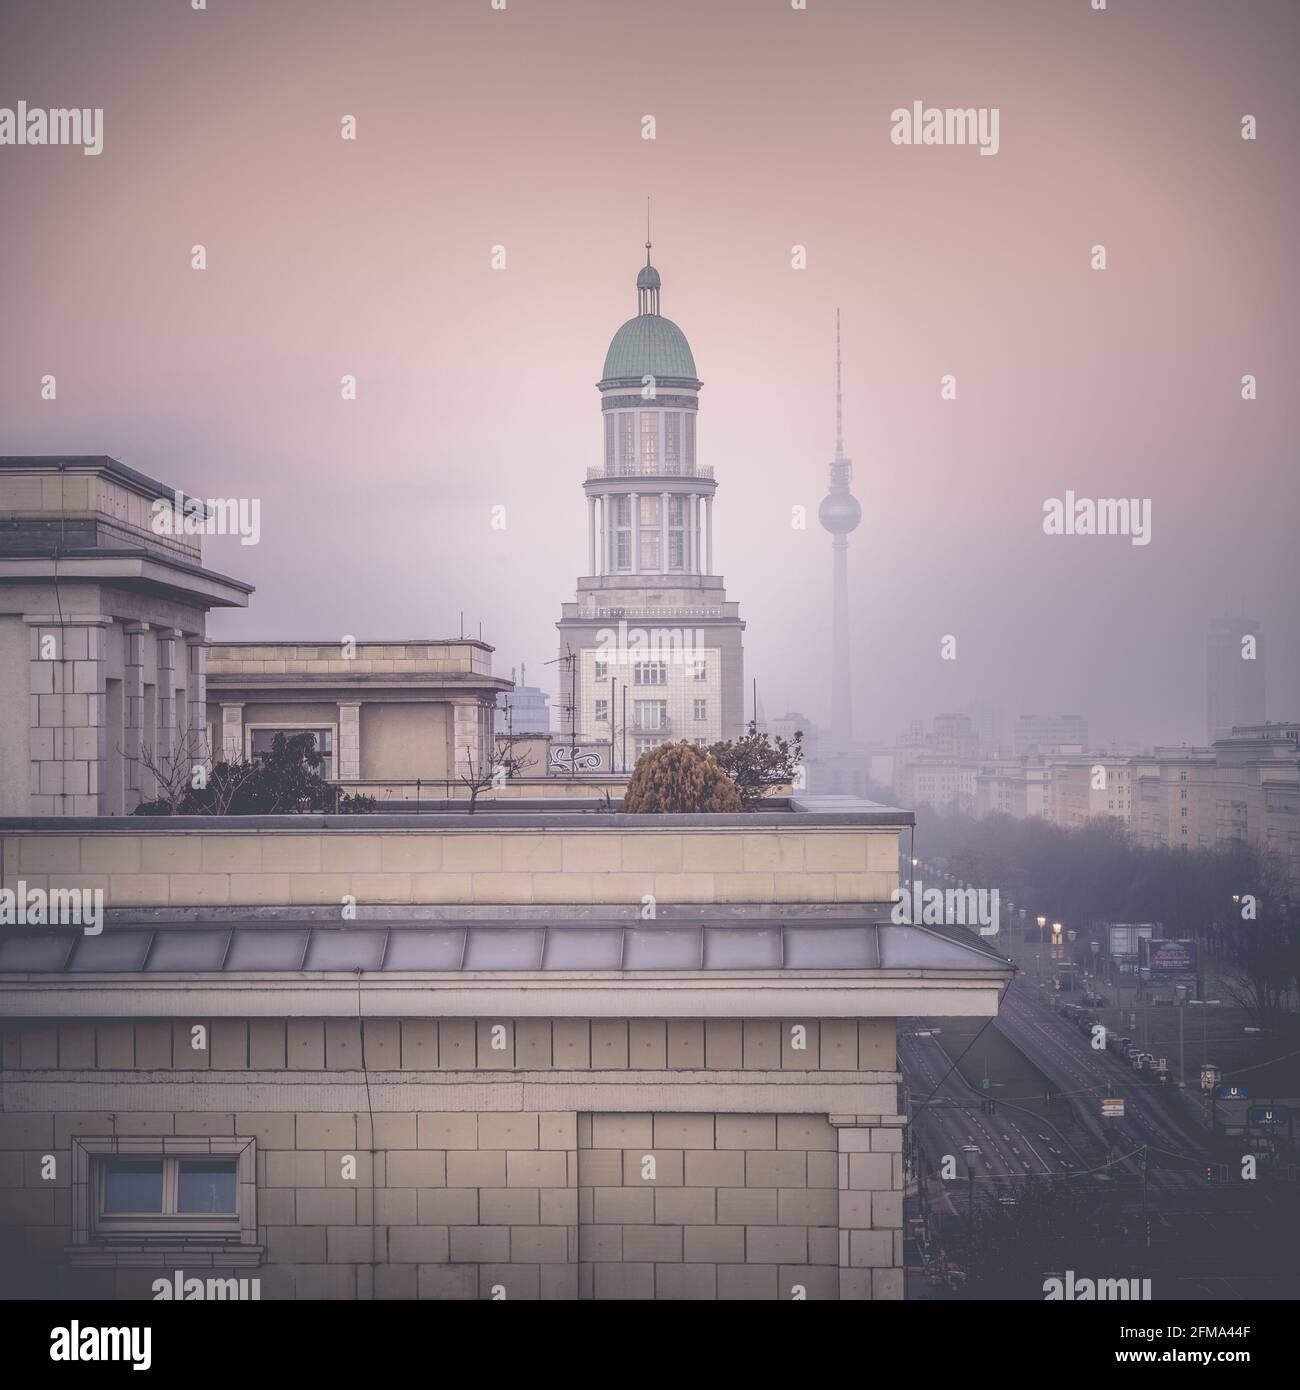 Berlin from above with a view of the foggy Karl-Marx-Allee on Frankfurt with the Berlin TV tower in the morning. Stock Photo